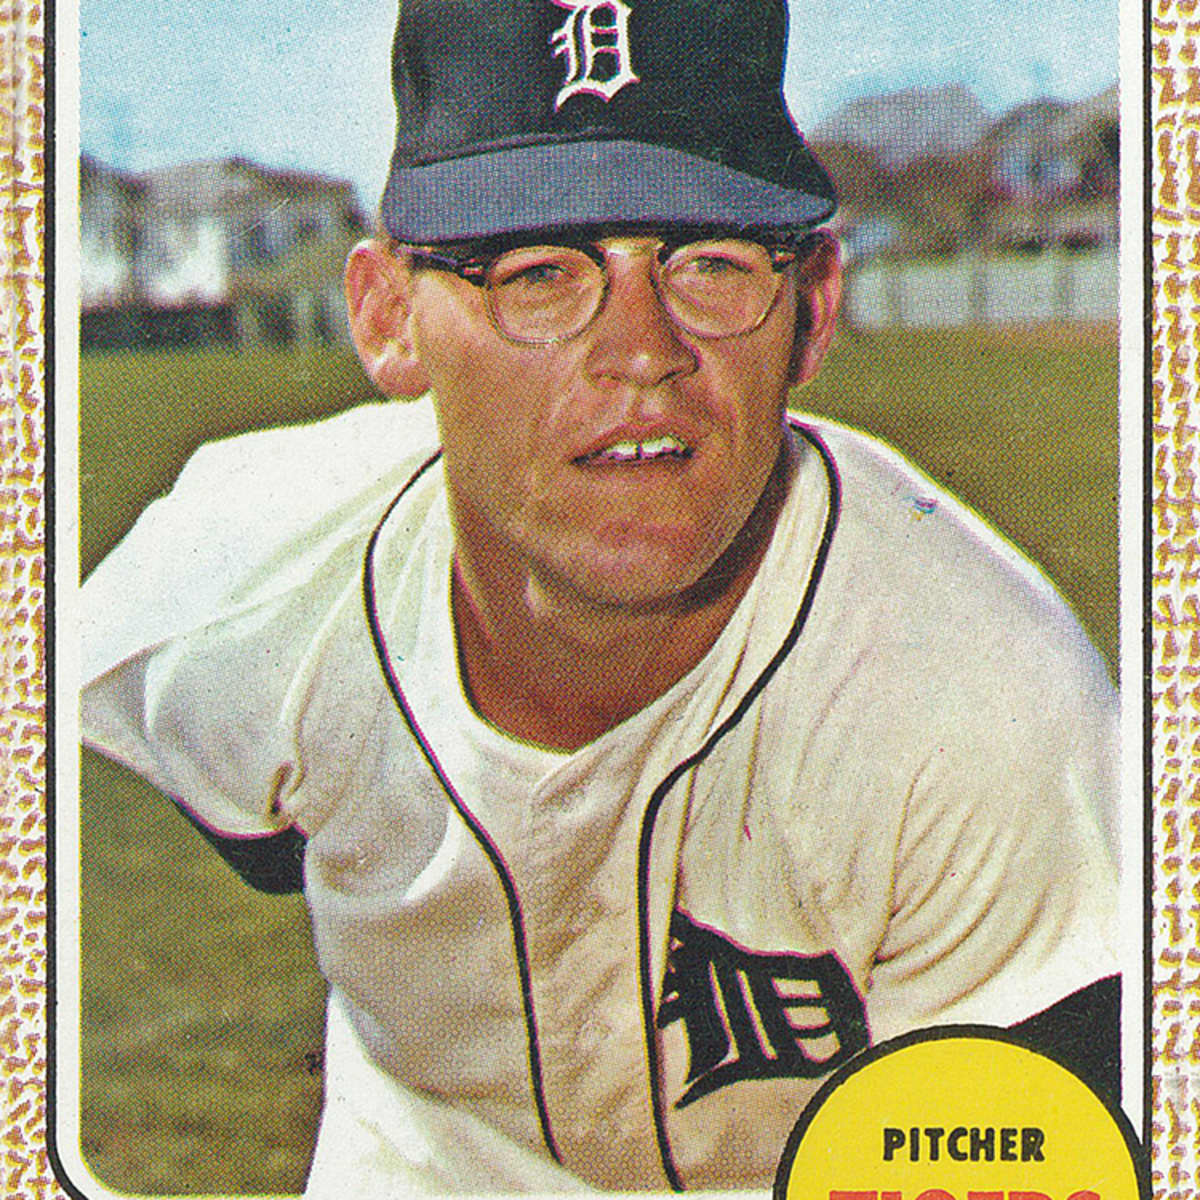 Denny Mclain: Most Up-to-Date Encyclopedia, News & Reviews